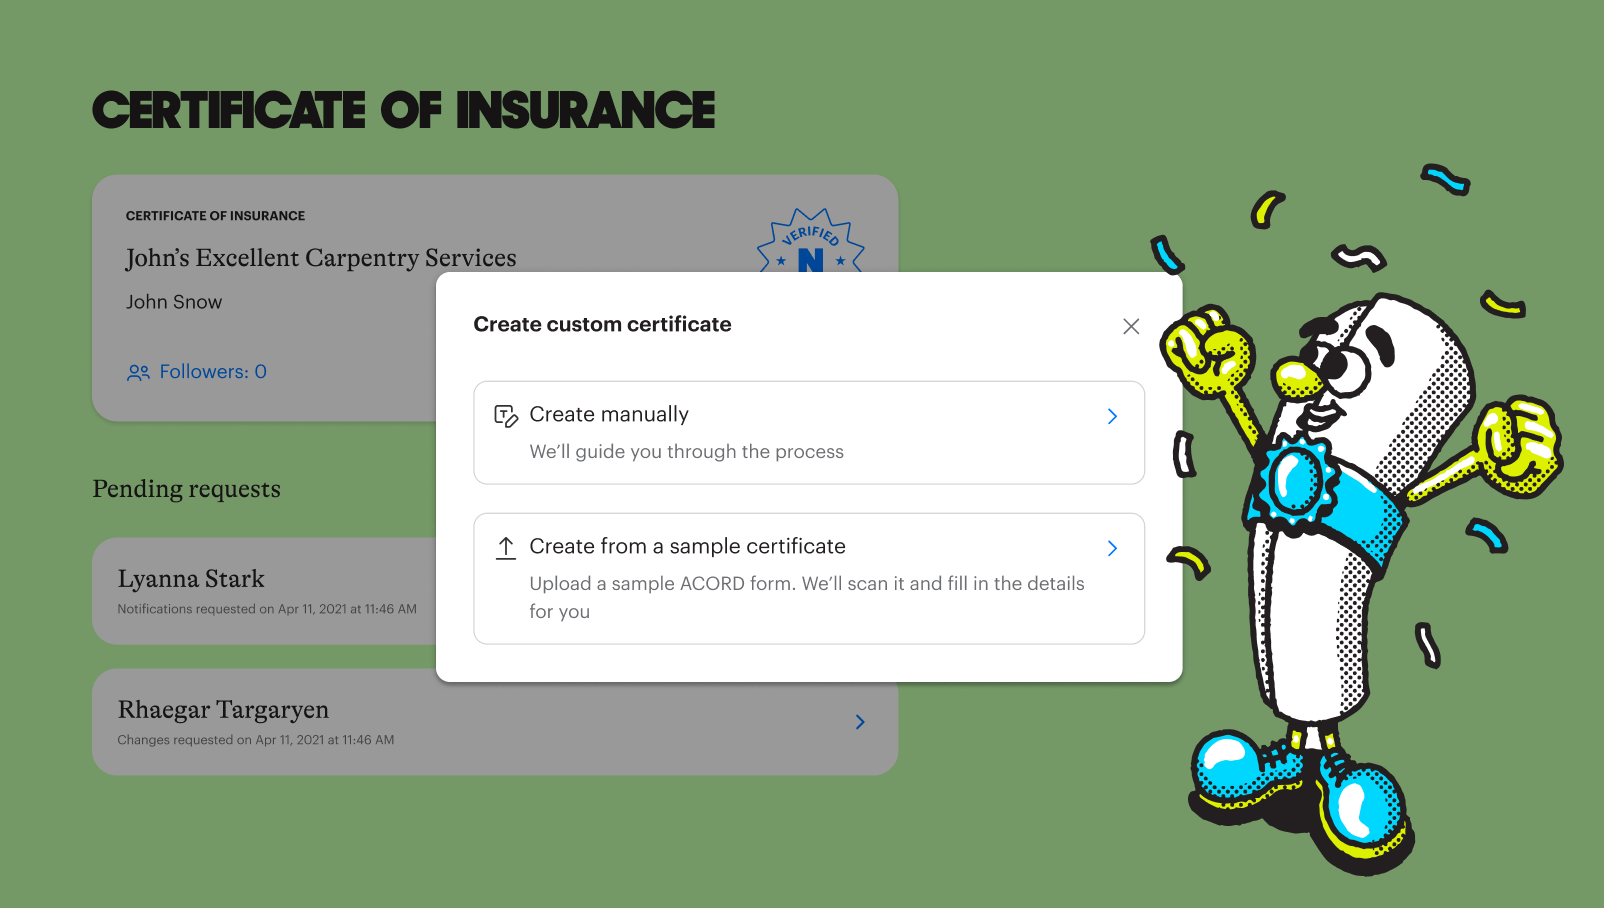 NEXT Insurance launches Certificate of Insurance (COI) Analyzer to streamline the insurance process with cutting edge machine learning capabilities